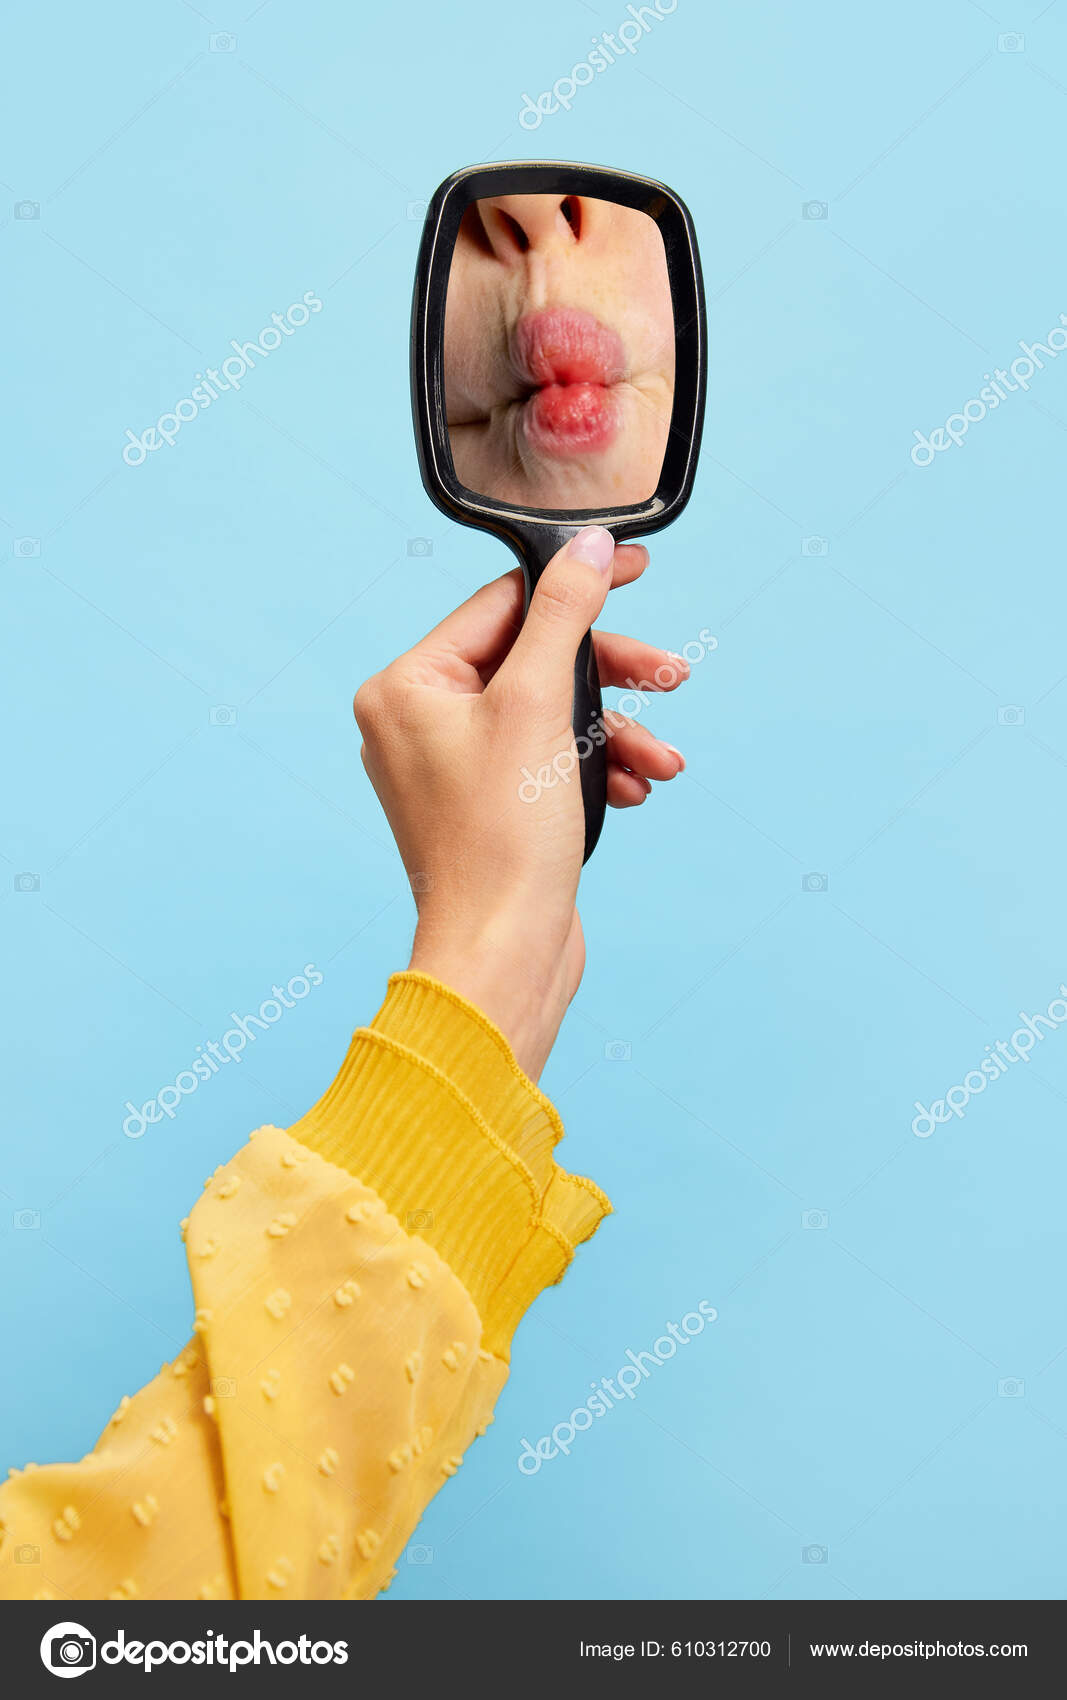 Making Fish Face Womans Hands Holding Small Mirror Reflection Female —  Stock Photo © vova130555@gmail.com #610312700